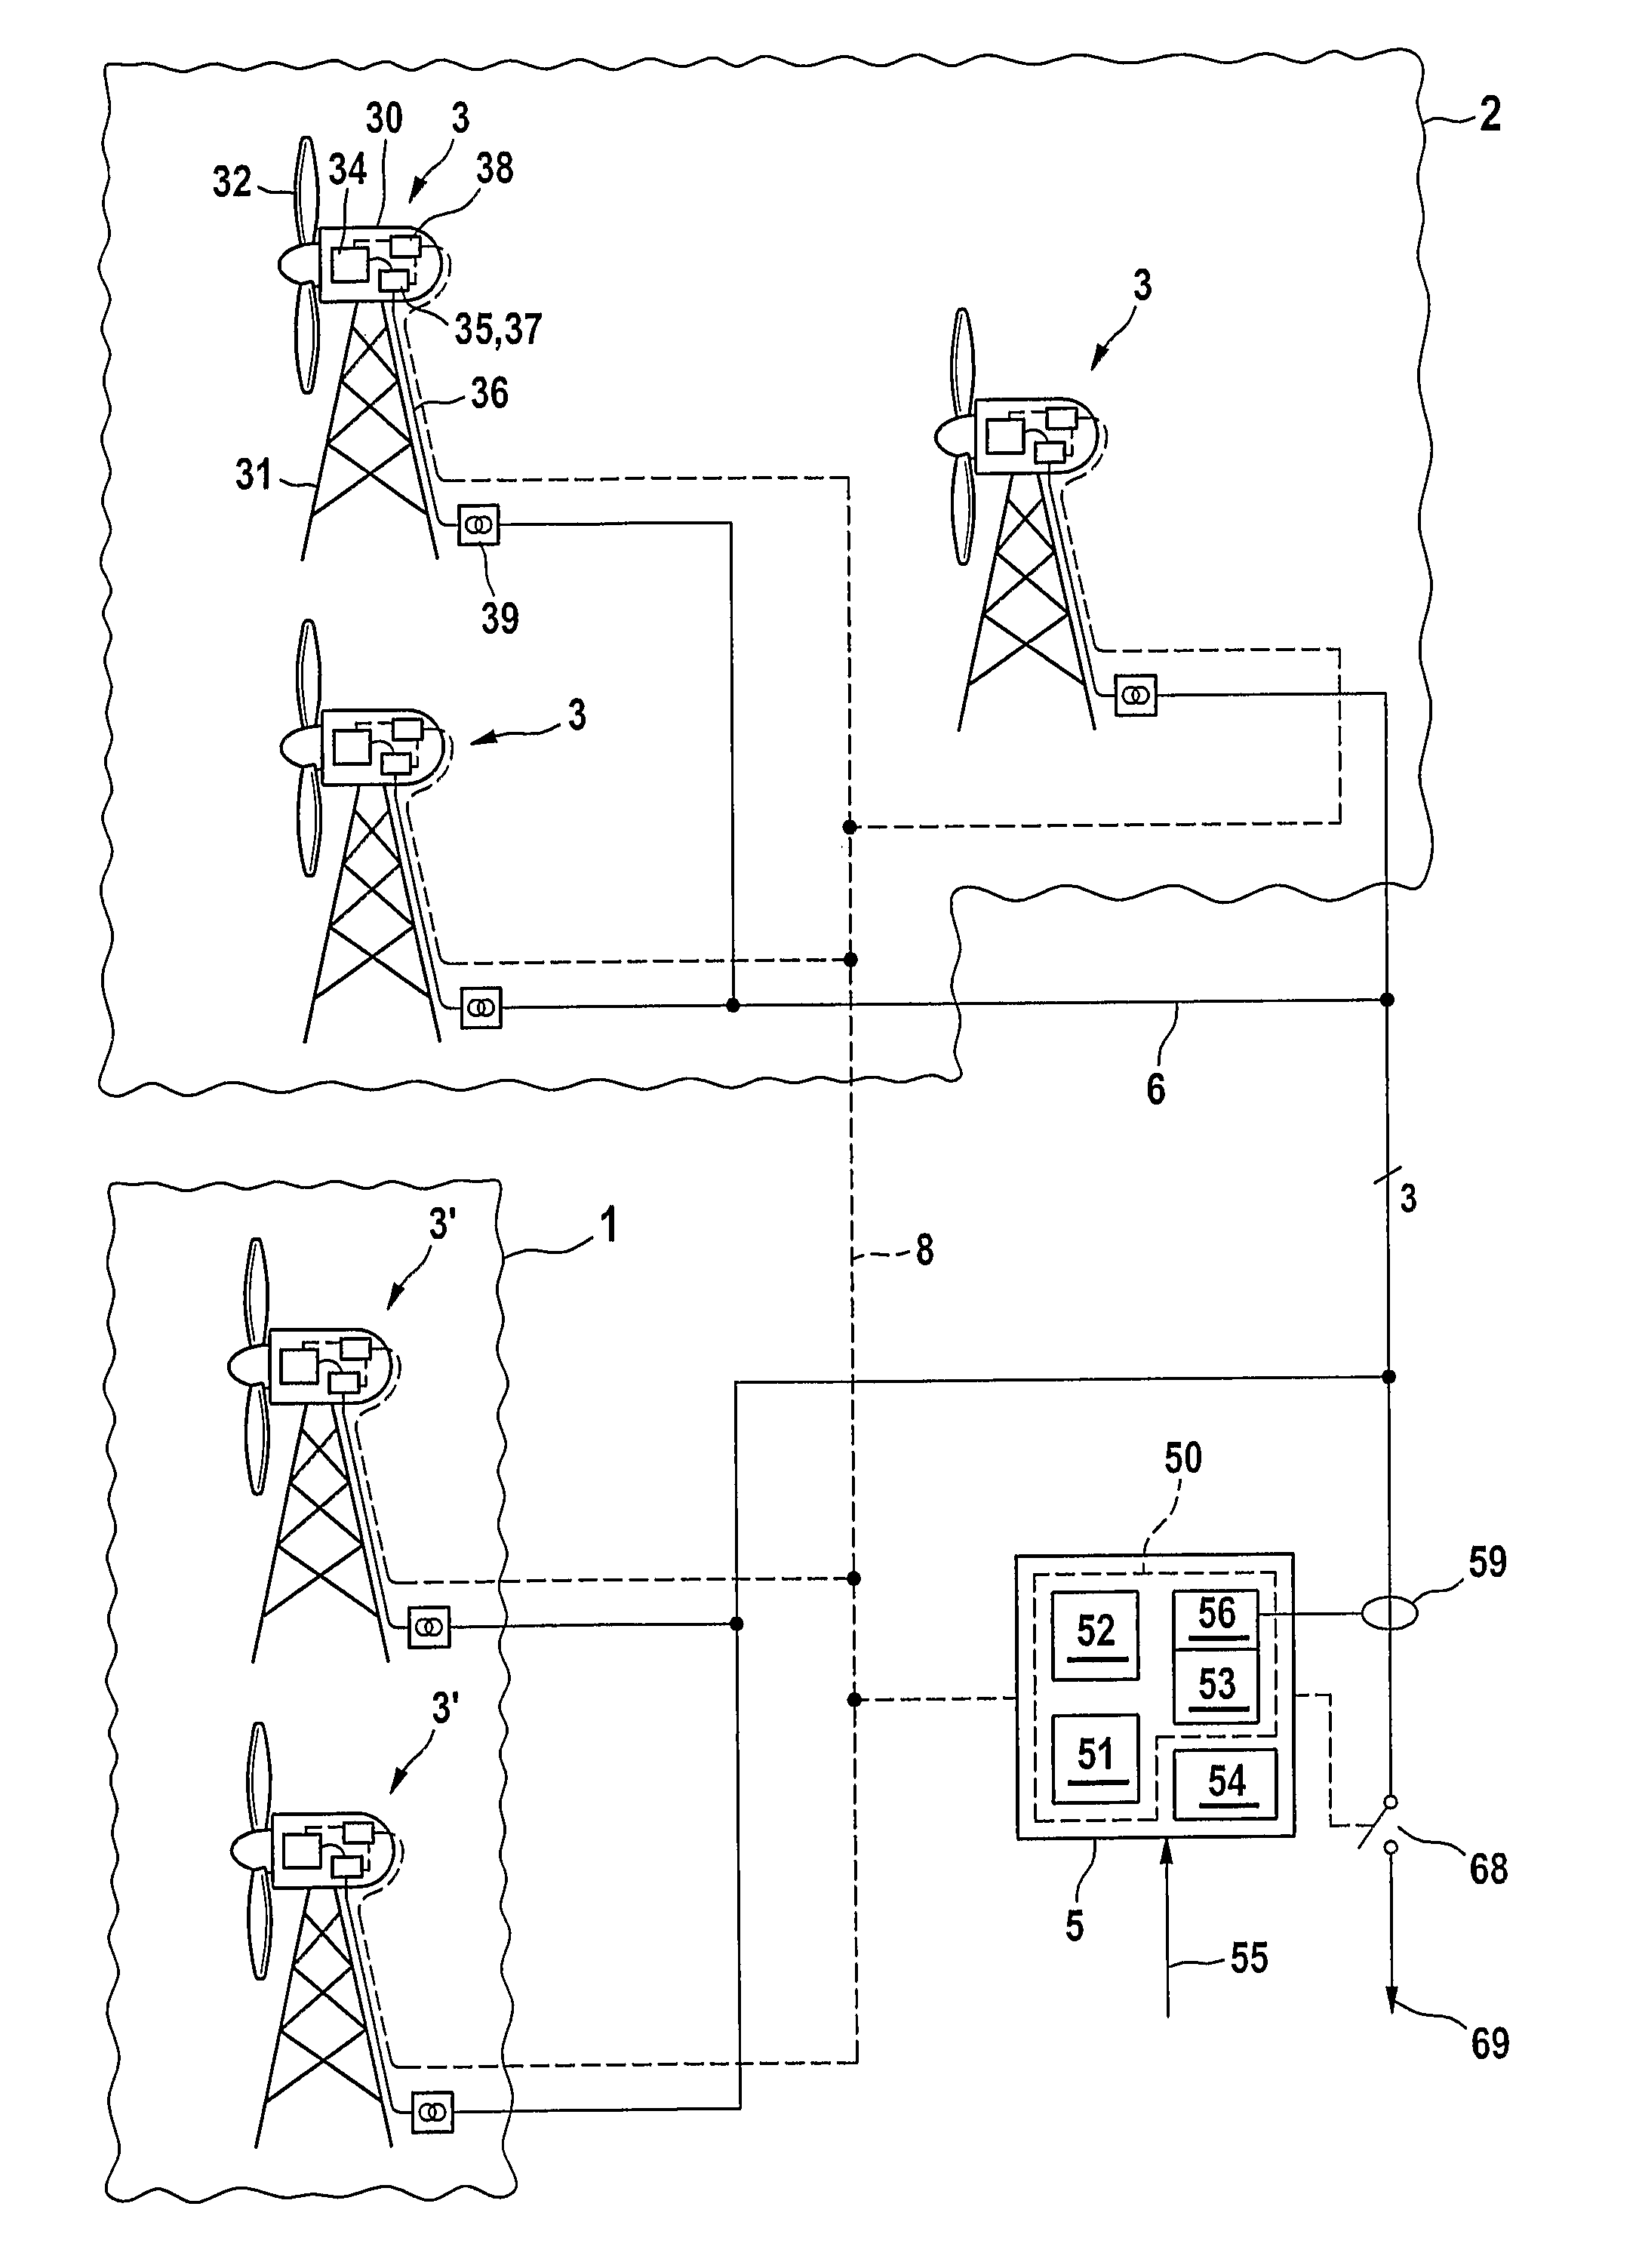 Power control of a wind farm and method thereof